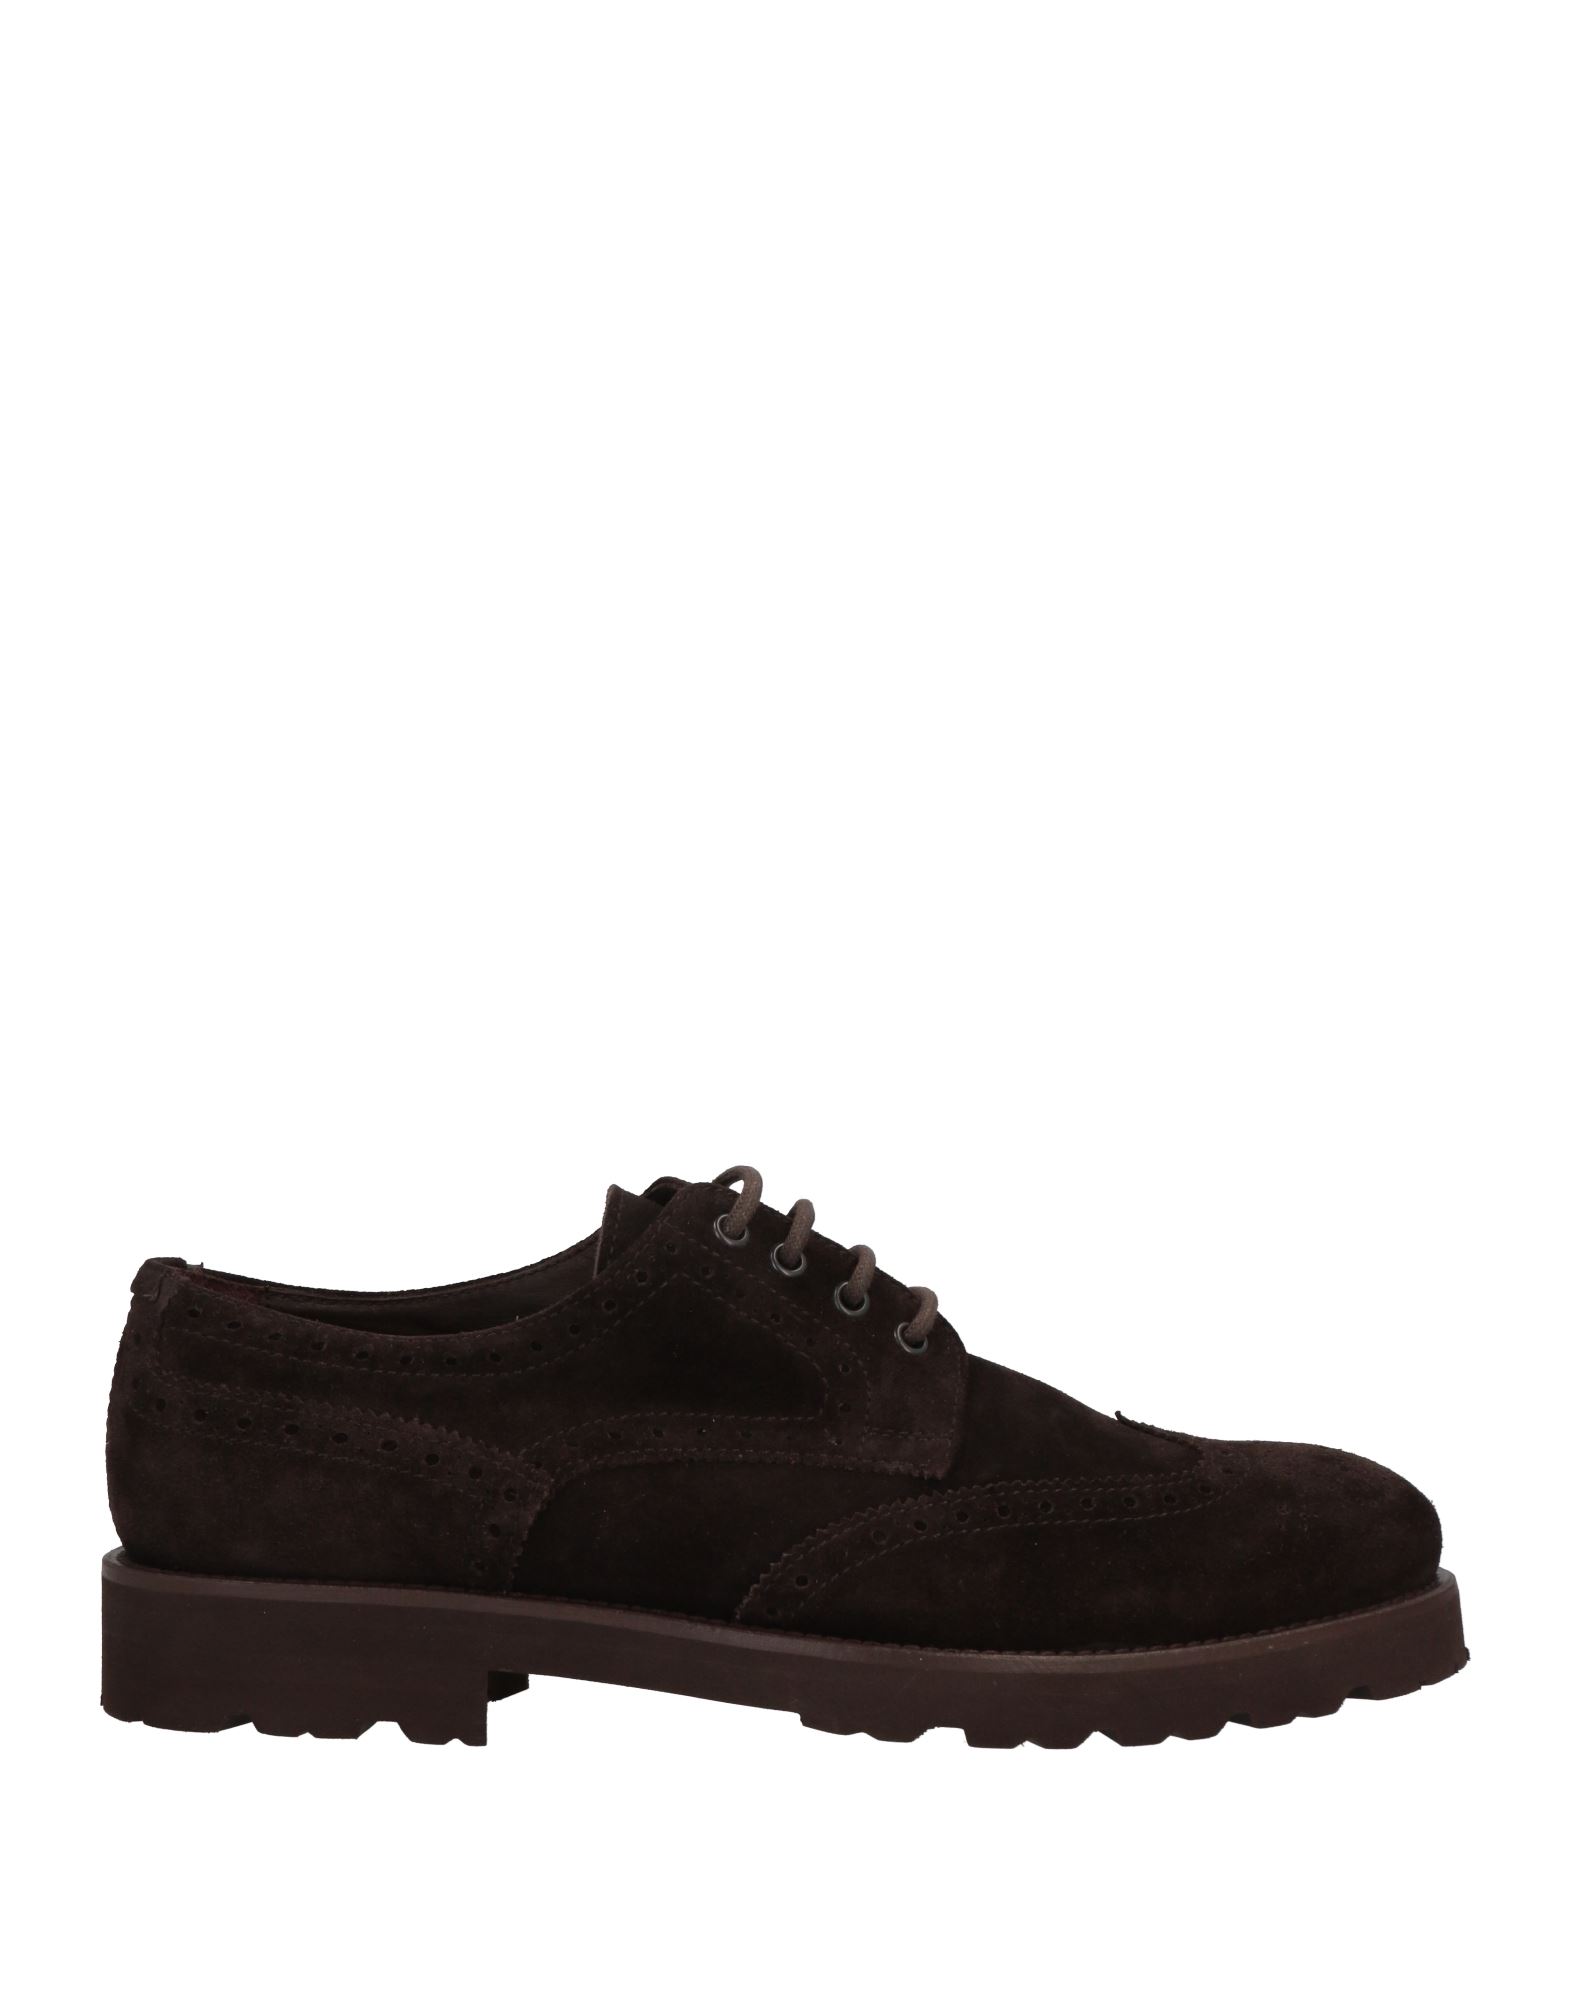 JEROLD WILTON Lace-up shoes